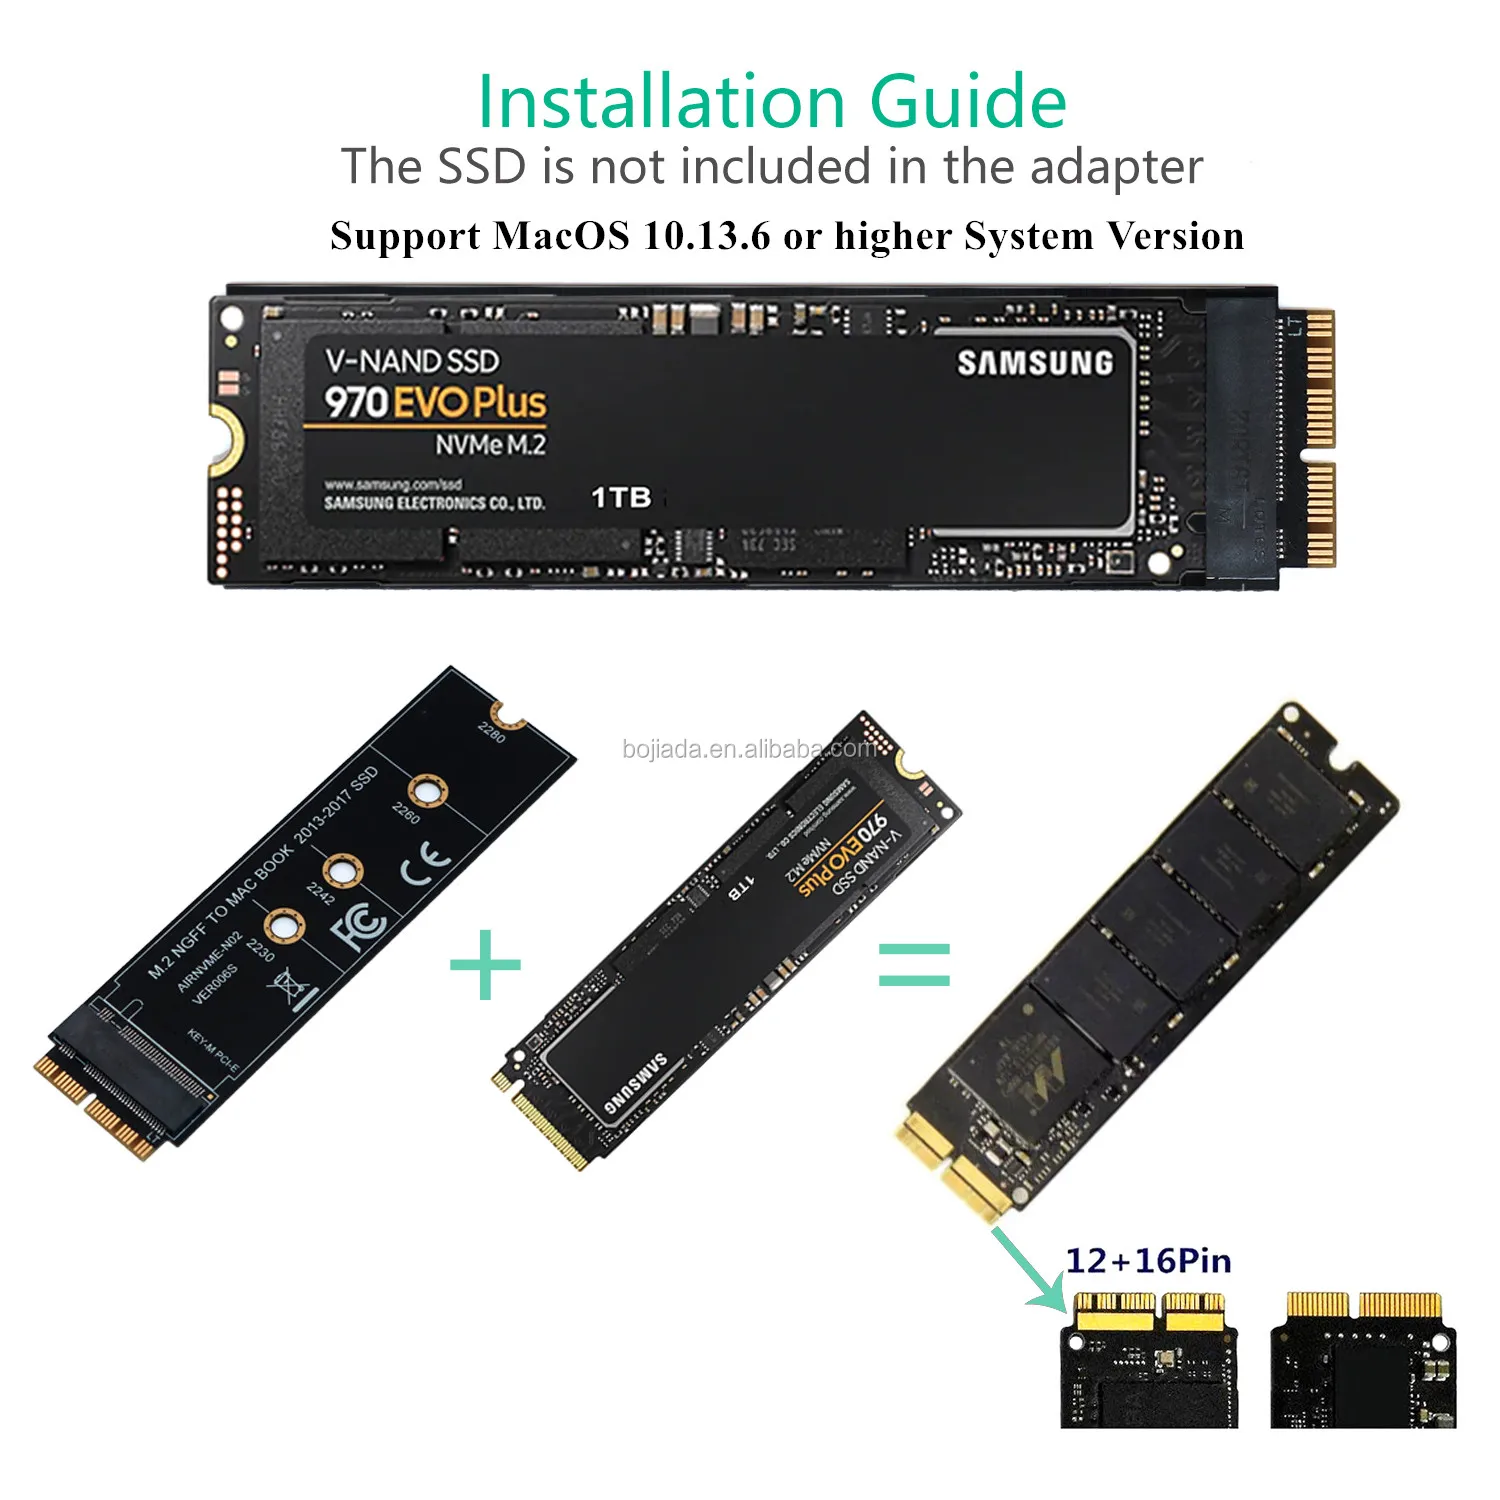 M.2 M-key Nvme Ahci Ssd Adapter To 12+16pin Connector For 2013 